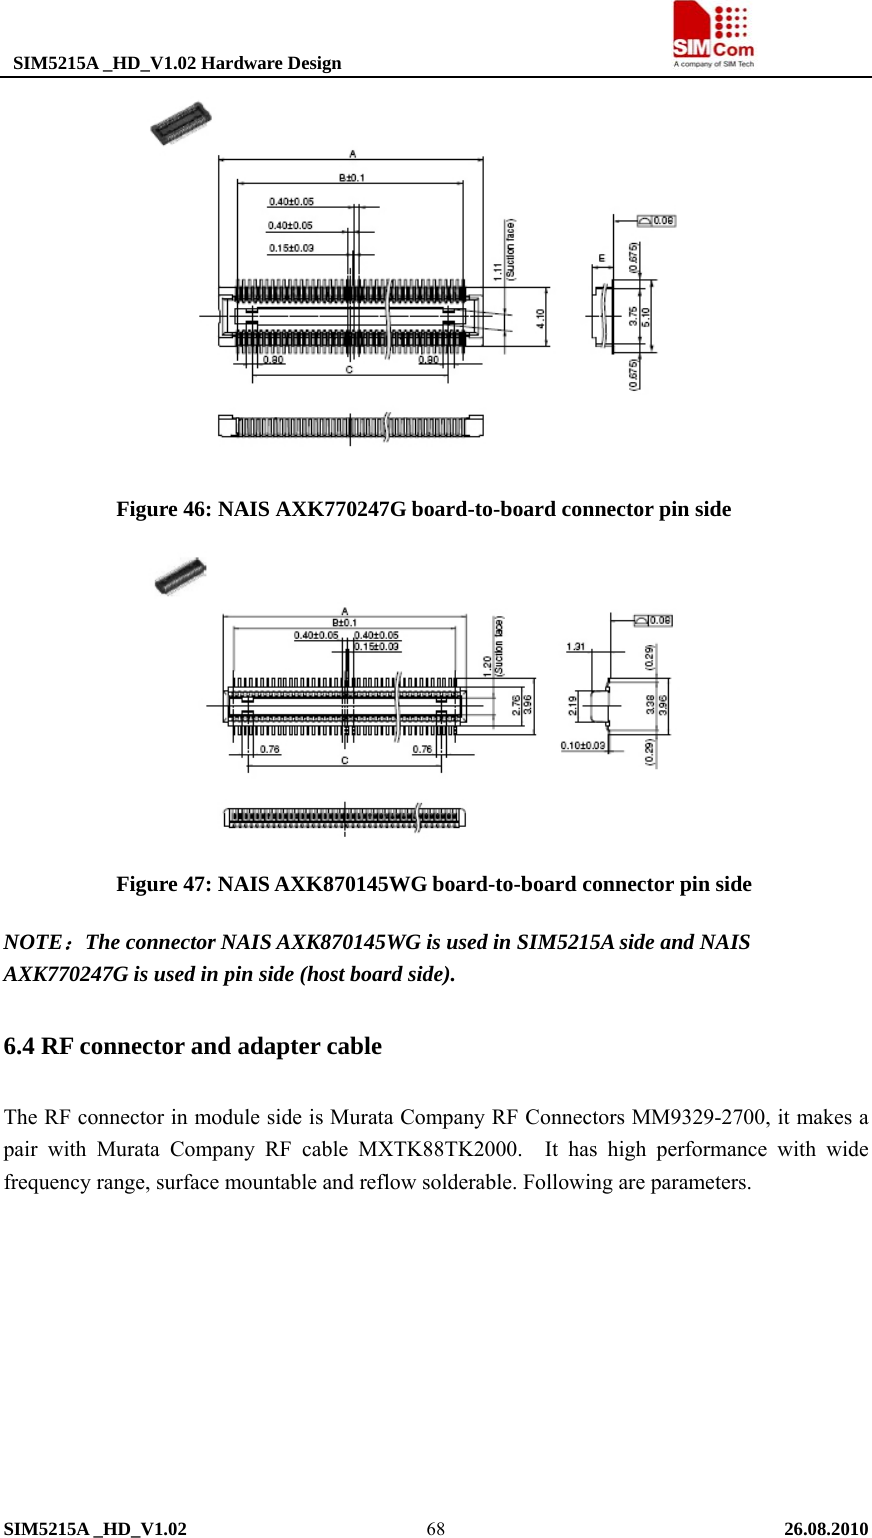  SIM5215A _HD_V1.02 Hardware Design                                     SIM5215A _HD_V1.02   26.08.2010   68 Figure 46: NAIS AXK770247G board-to-board connector pin side                 Figure 47: NAIS AXK870145WG board-to-board connector pin side NOTE：The connector NAIS AXK870145WG is used in SIM5215A side and NAIS AXK770247G is used in pin side (host board side). 6.4 RF connector and adapter cable The RF connector in module side is Murata Company RF Connectors MM9329-2700, it makes a pair with Murata Company RF cable MXTK88TK2000.  It has high performance with wide frequency range, surface mountable and reflow solderable. Following are parameters.   